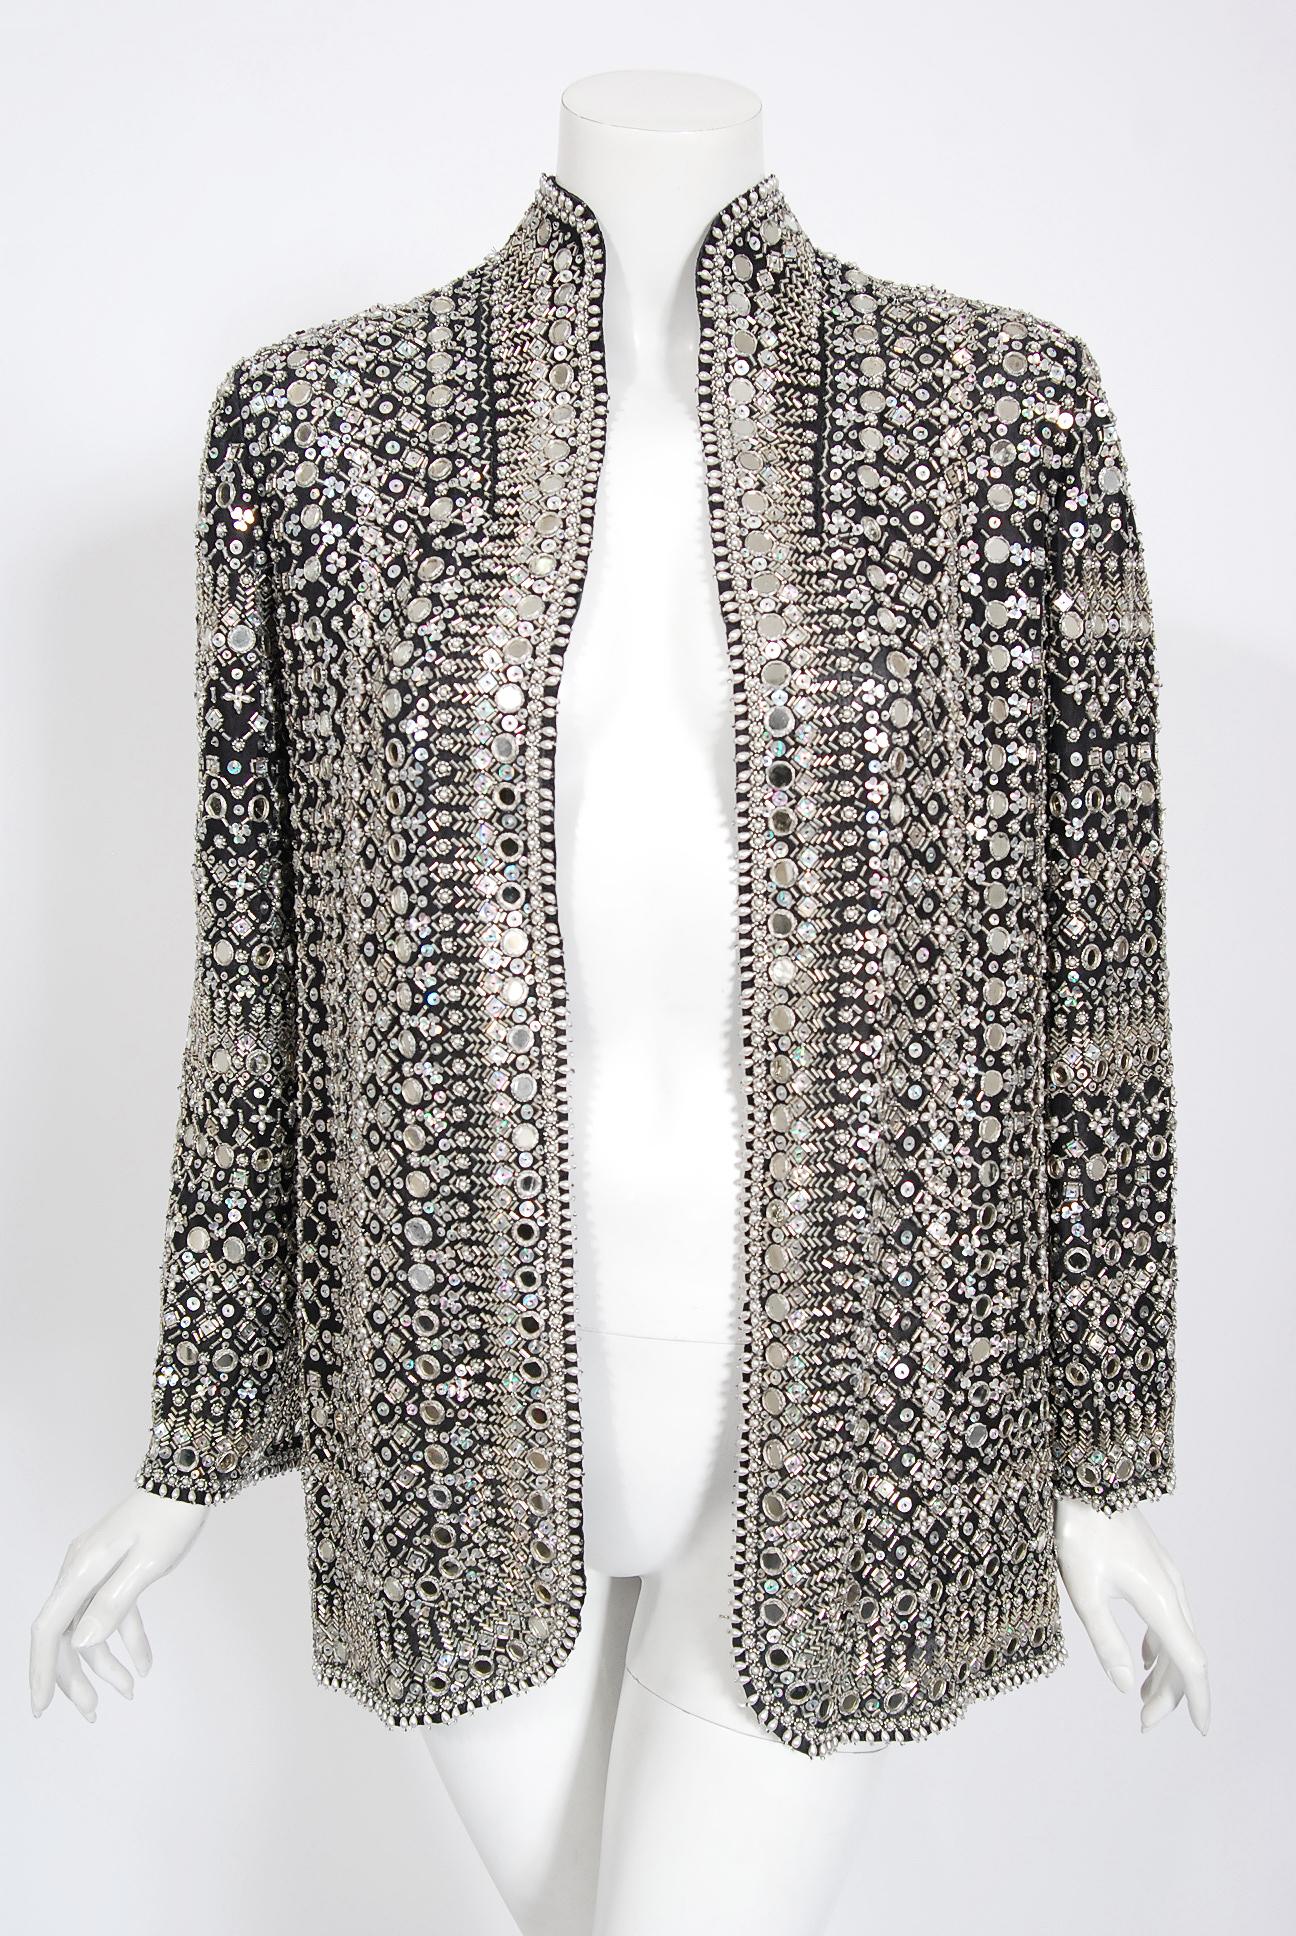 Vintage Halston Couture Beaded Mirror Mini Dress & Jacket Made For Liza Minnelli 2